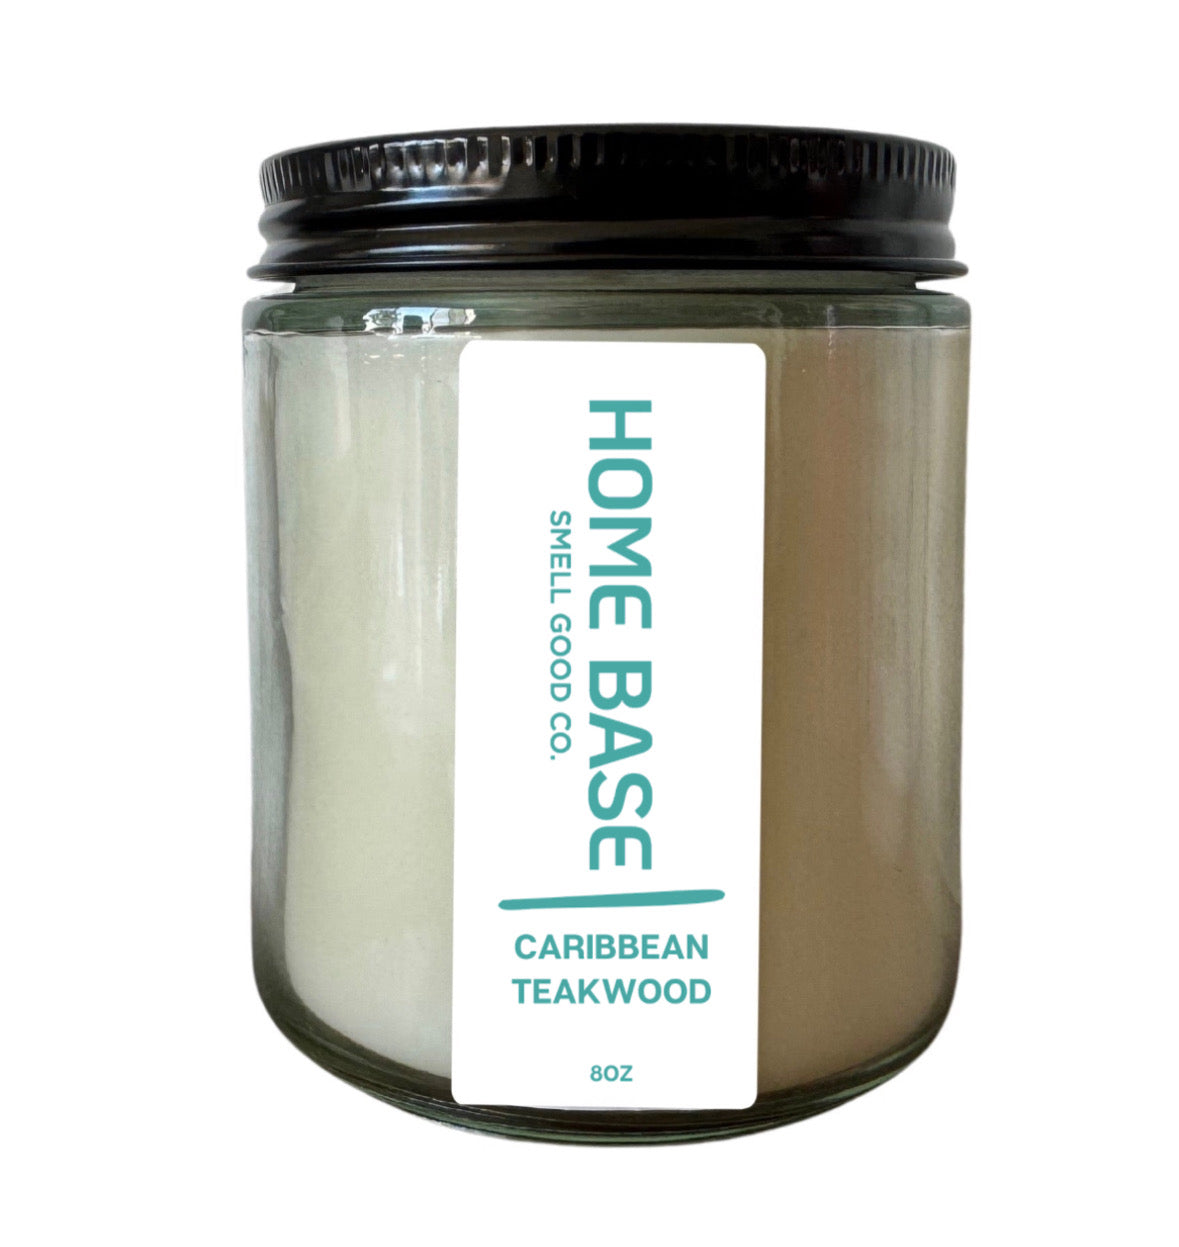 a. Caribbean Teakwood Scented Candle